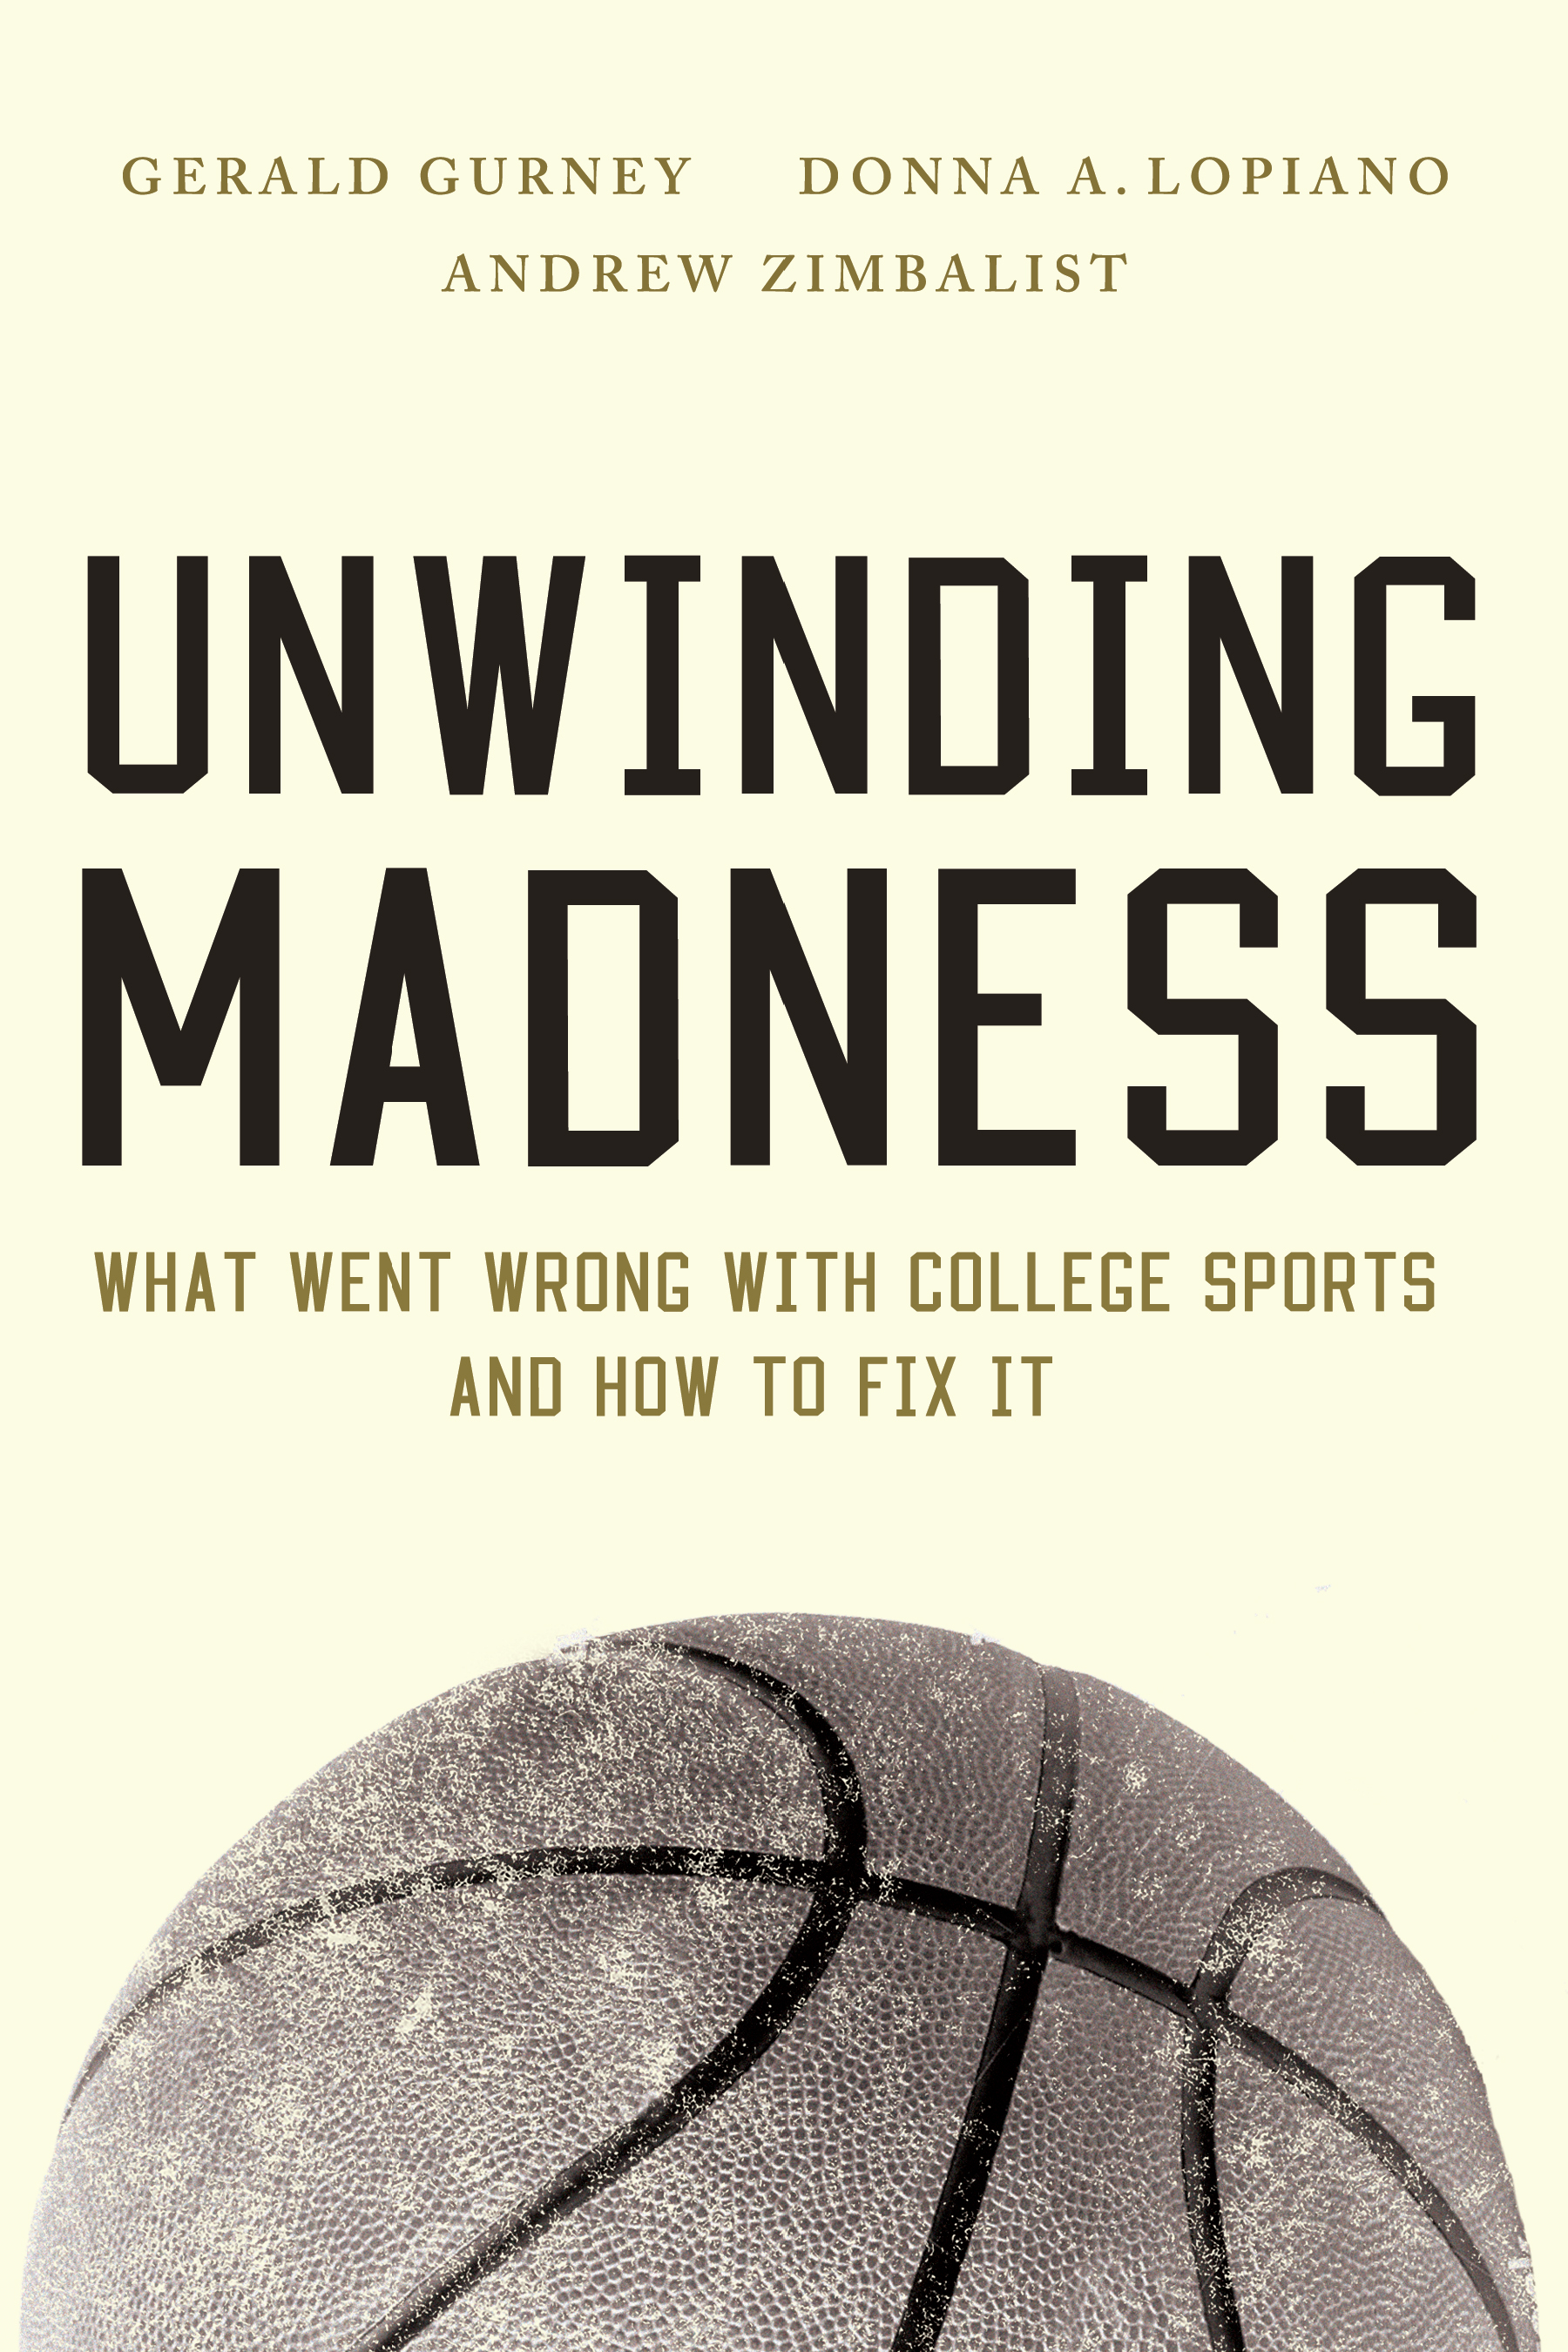 Unwinding Madness: What Went Wrong with College Sports? and How to Fix It